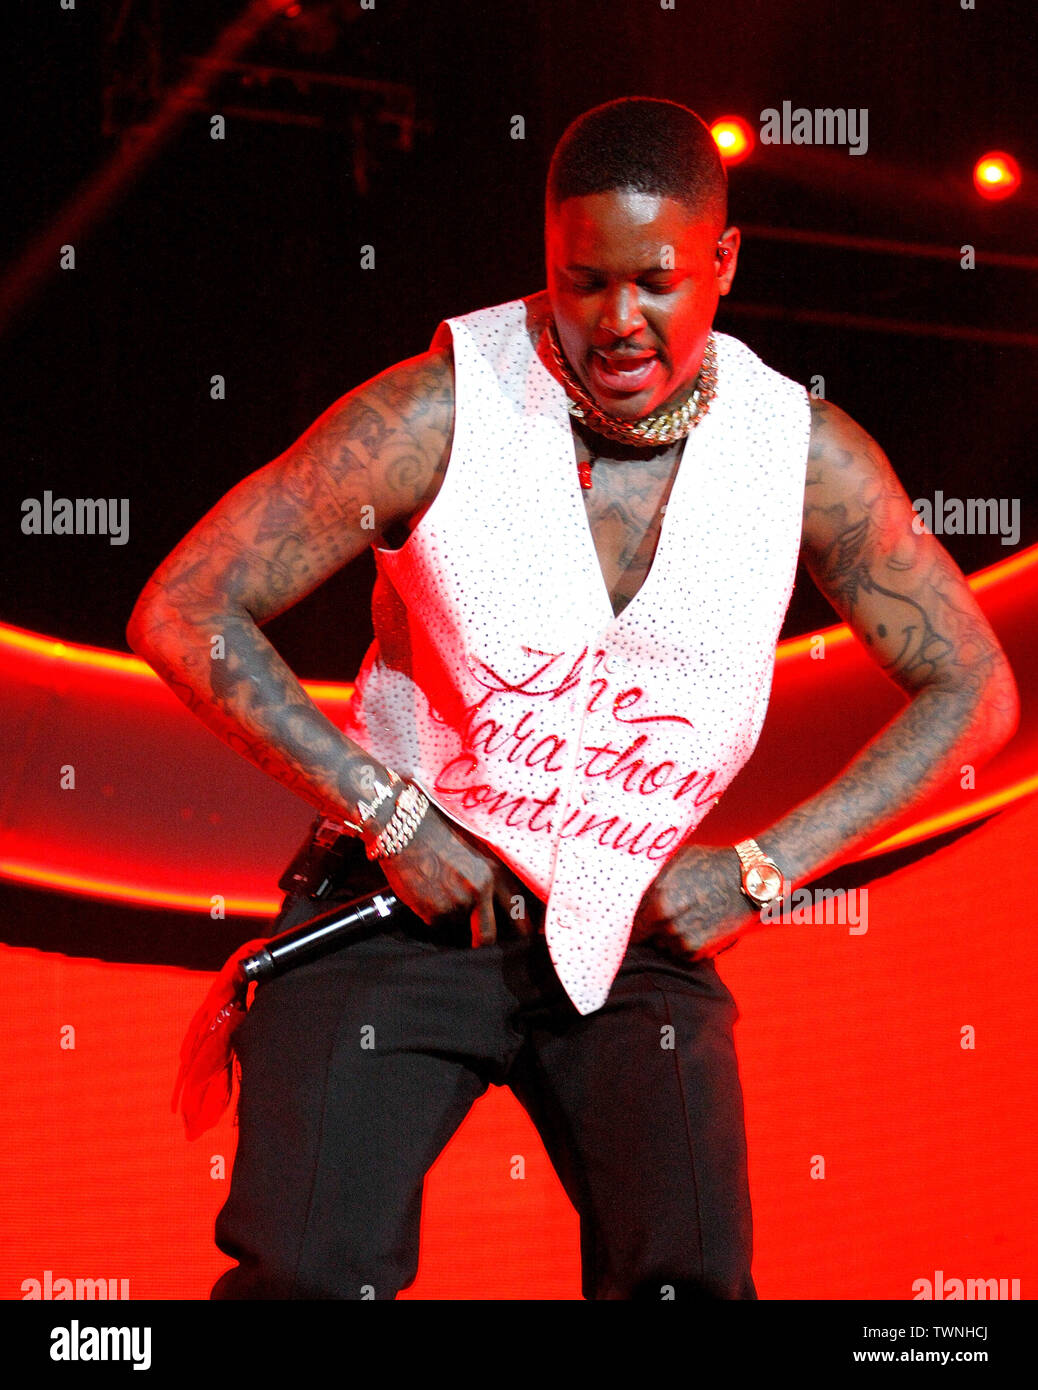 LOS ANGELES, CALIFORNIA - JUNE 21: YG performs onstage at the 2019 BET Experience STAPLES Center Concert at Staples Center on June 21, 2019 in Los Angeles, California. Photo: CraSH for imageSPACE Credit: MediaPunch Inc/Alamy Live News Stock Photo